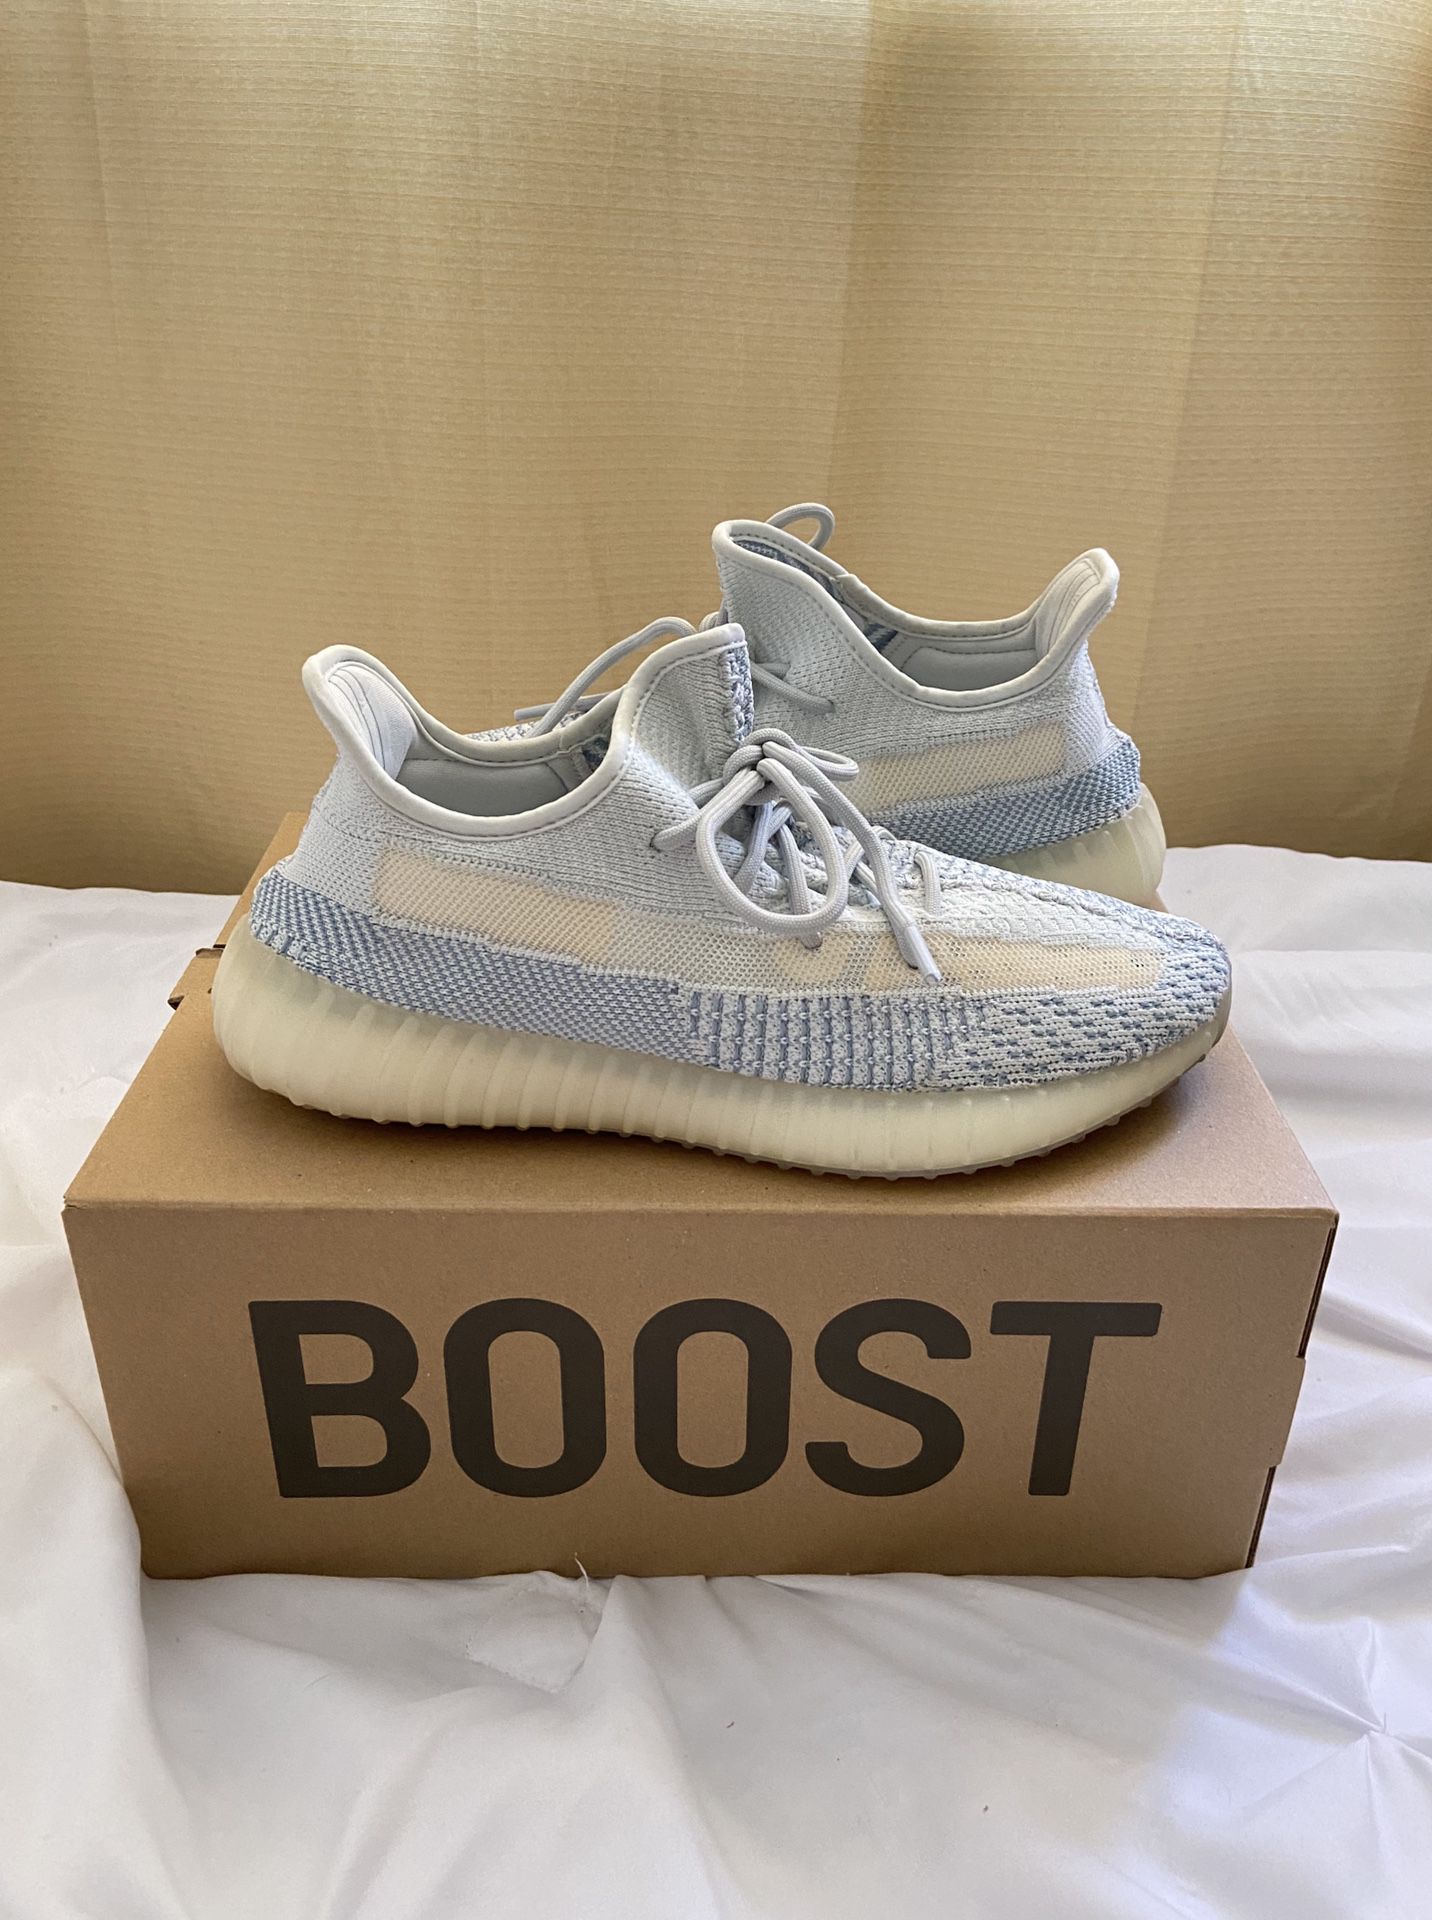 Yeezy Boost 350 V2 Cloud Whites